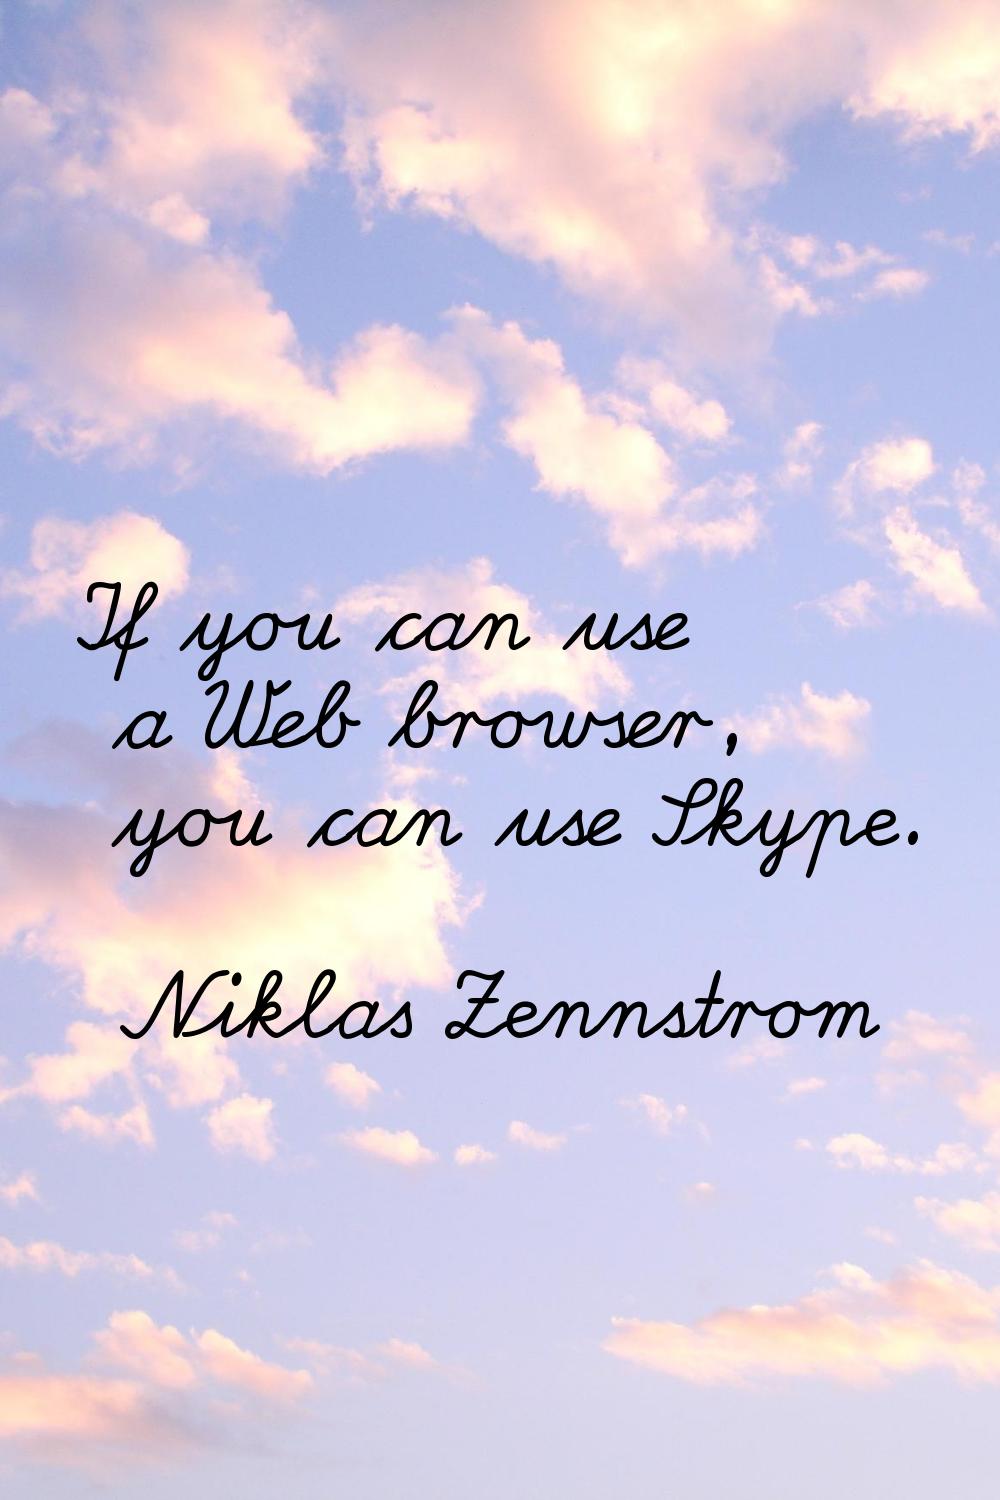 If you can use a Web browser, you can use Skype.